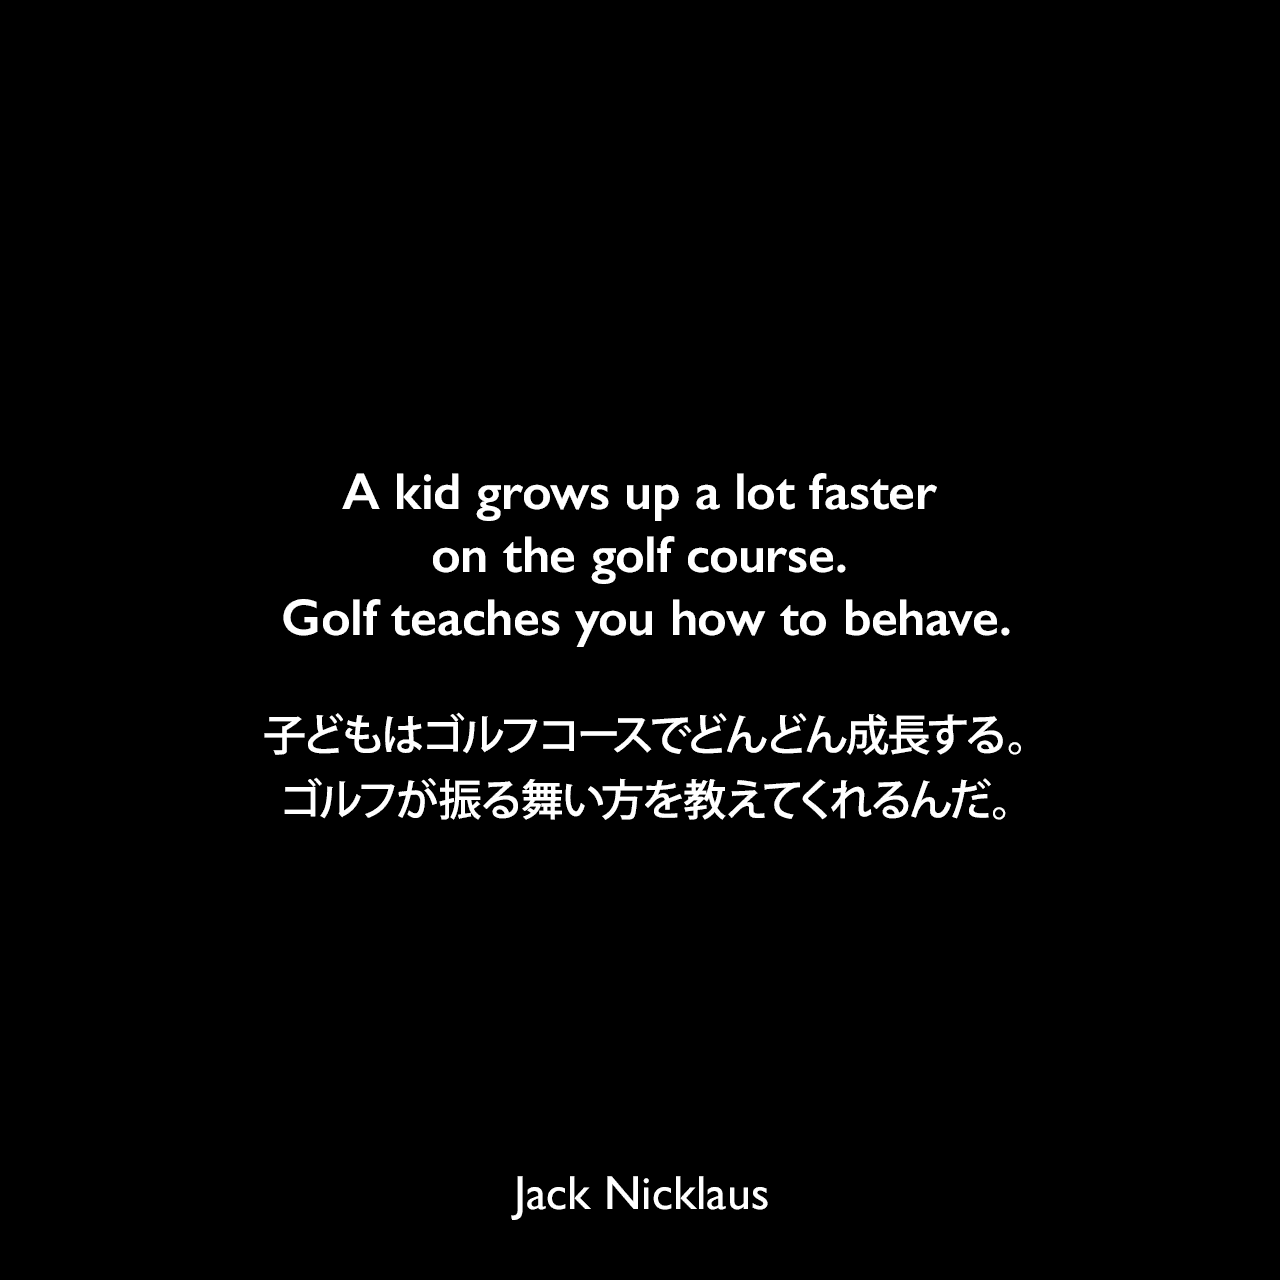 A kid grows up a lot faster on the golf course. Golf teaches you how to behave.子どもはゴルフコースでどんどん成長する。ゴルフが振る舞い方を教えてくれるんだ。Jack Nicklaus